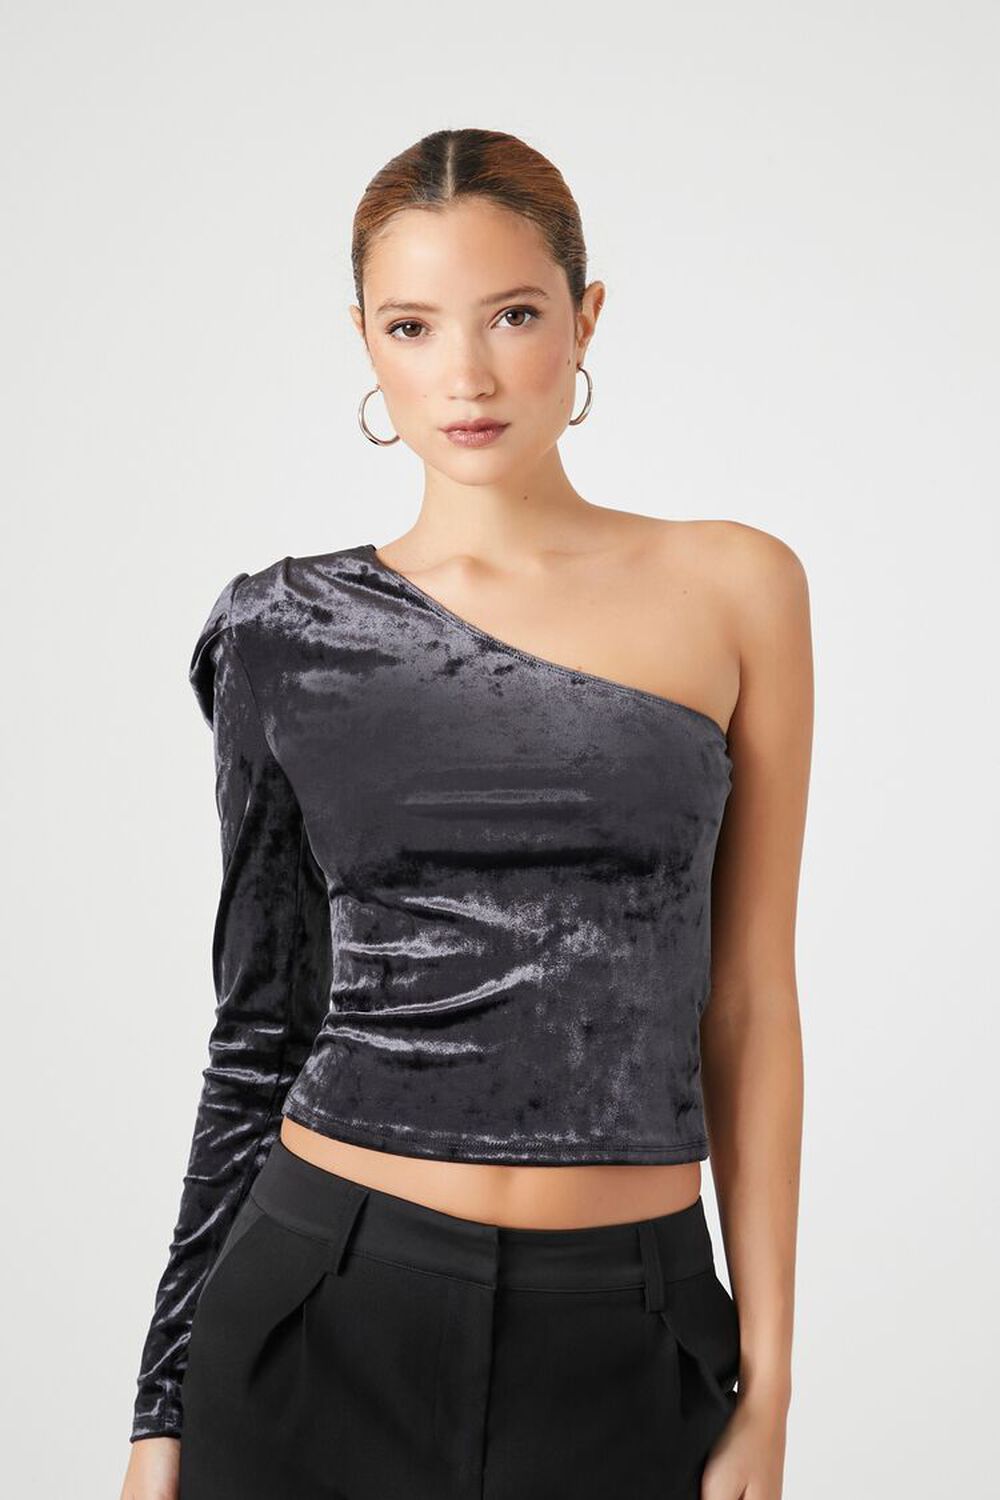 Body Smoothing Lace Crop Top For Support And Flair 